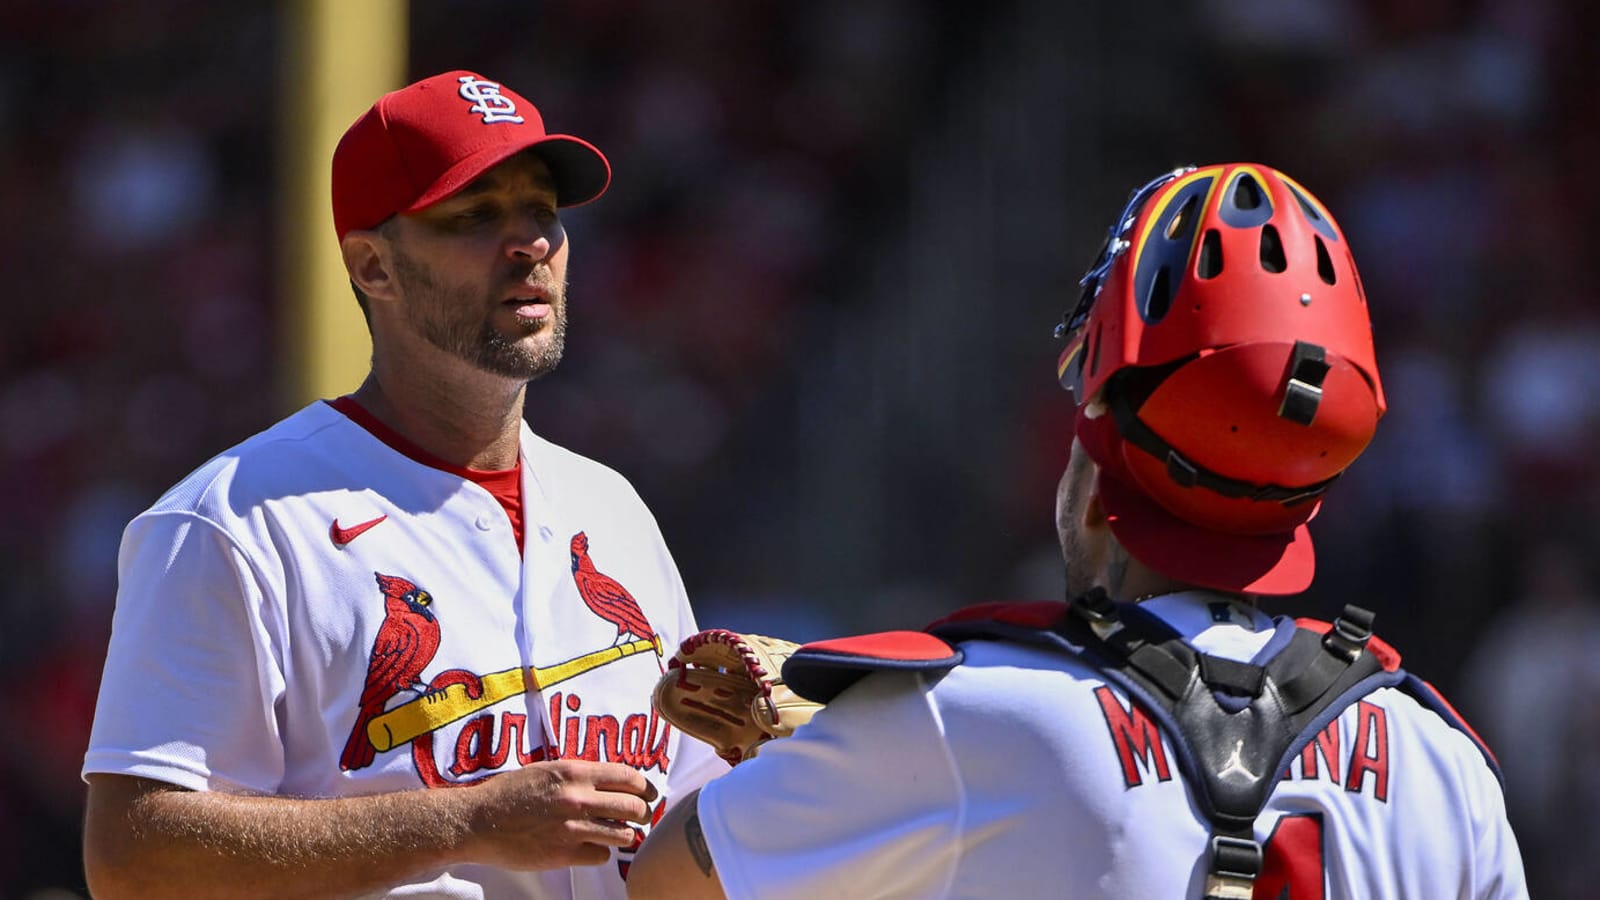 Yadier Molina to wear special helmet commemorating record-breaking start  with Adam Wainwright